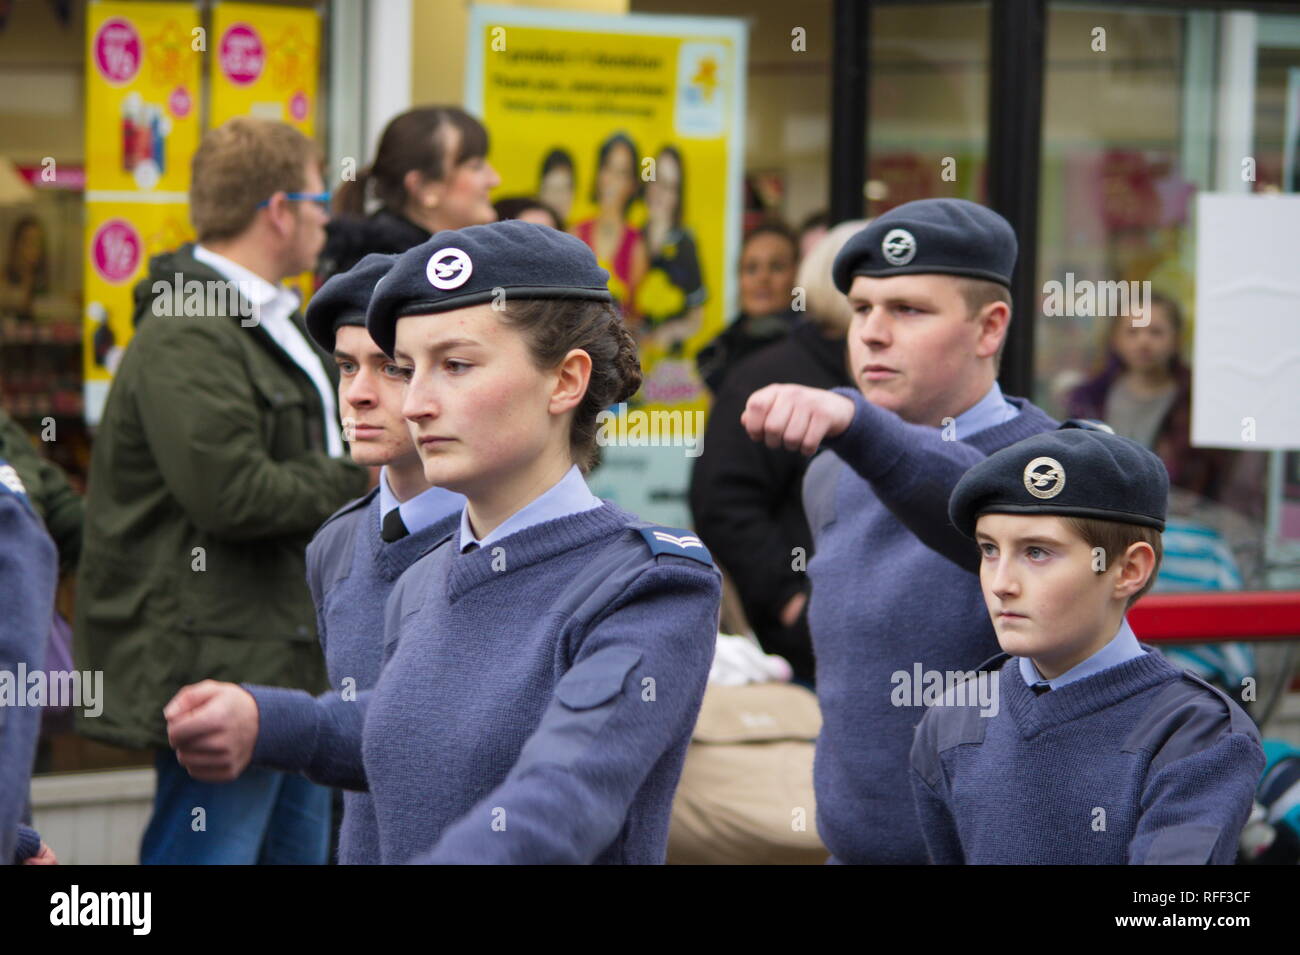 Air Cadets March At Houghton Feast Carnival Parade 2017Houghton Feast ...